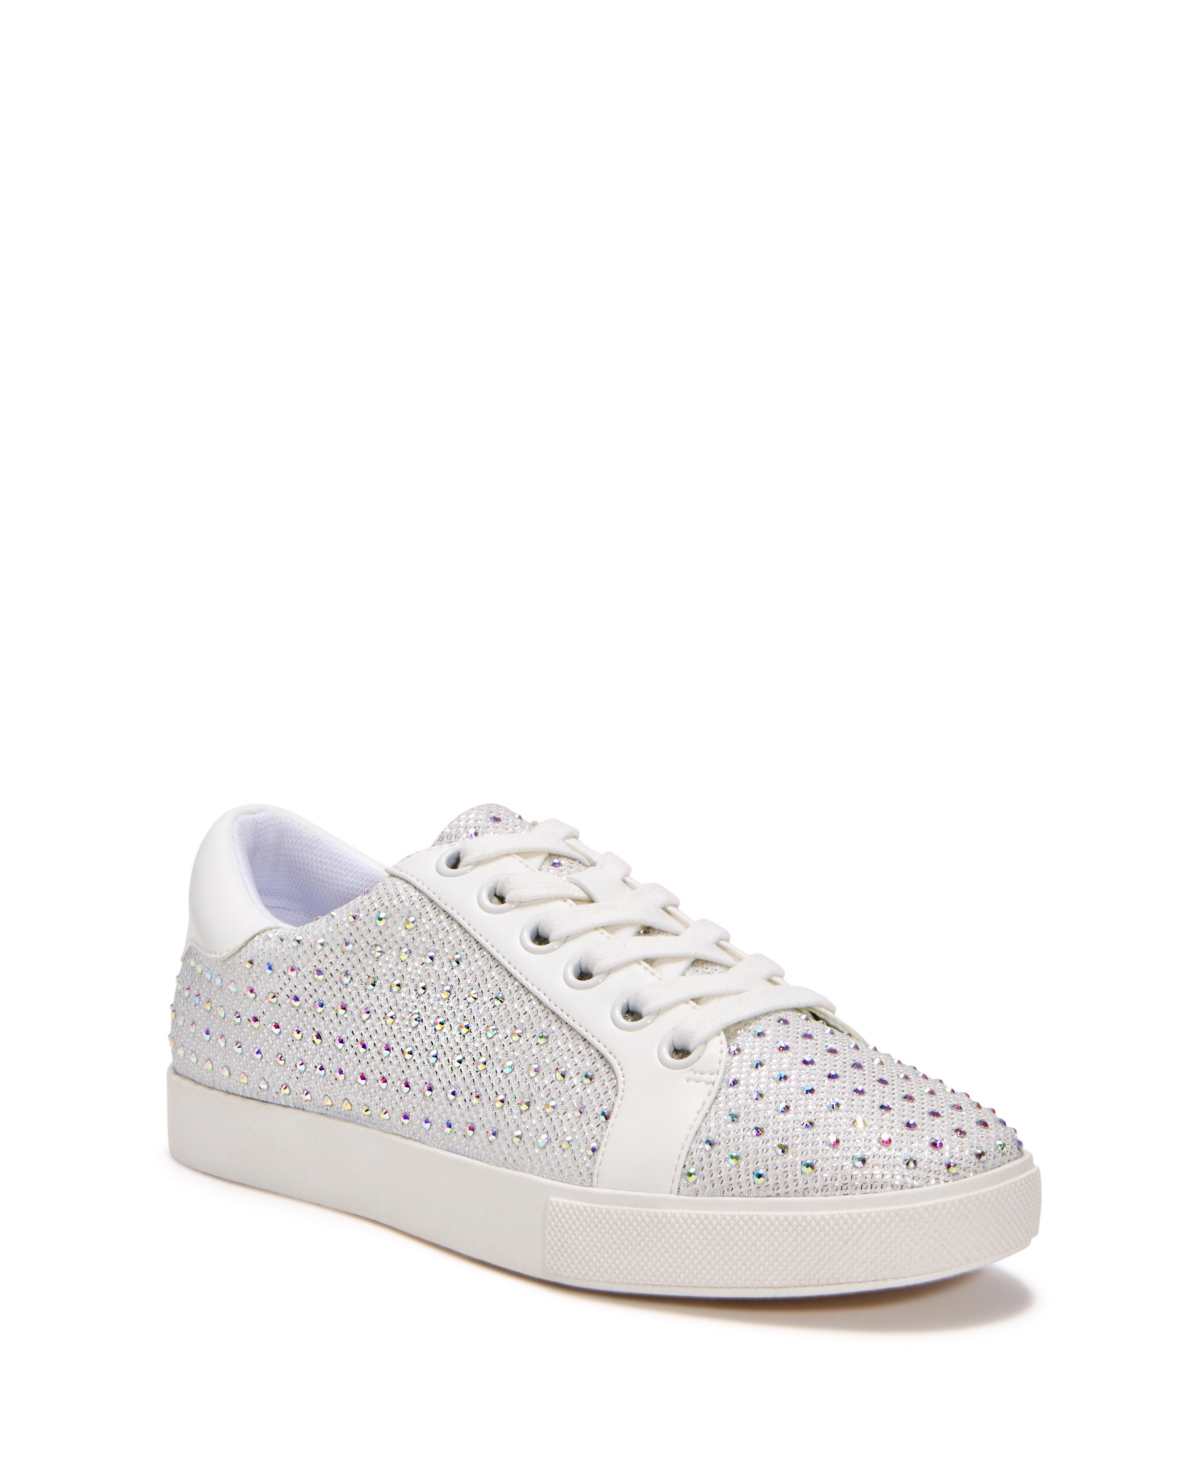 KATY PERRY WOMEN'S THE RIZZO LACE-UP SNEAKER